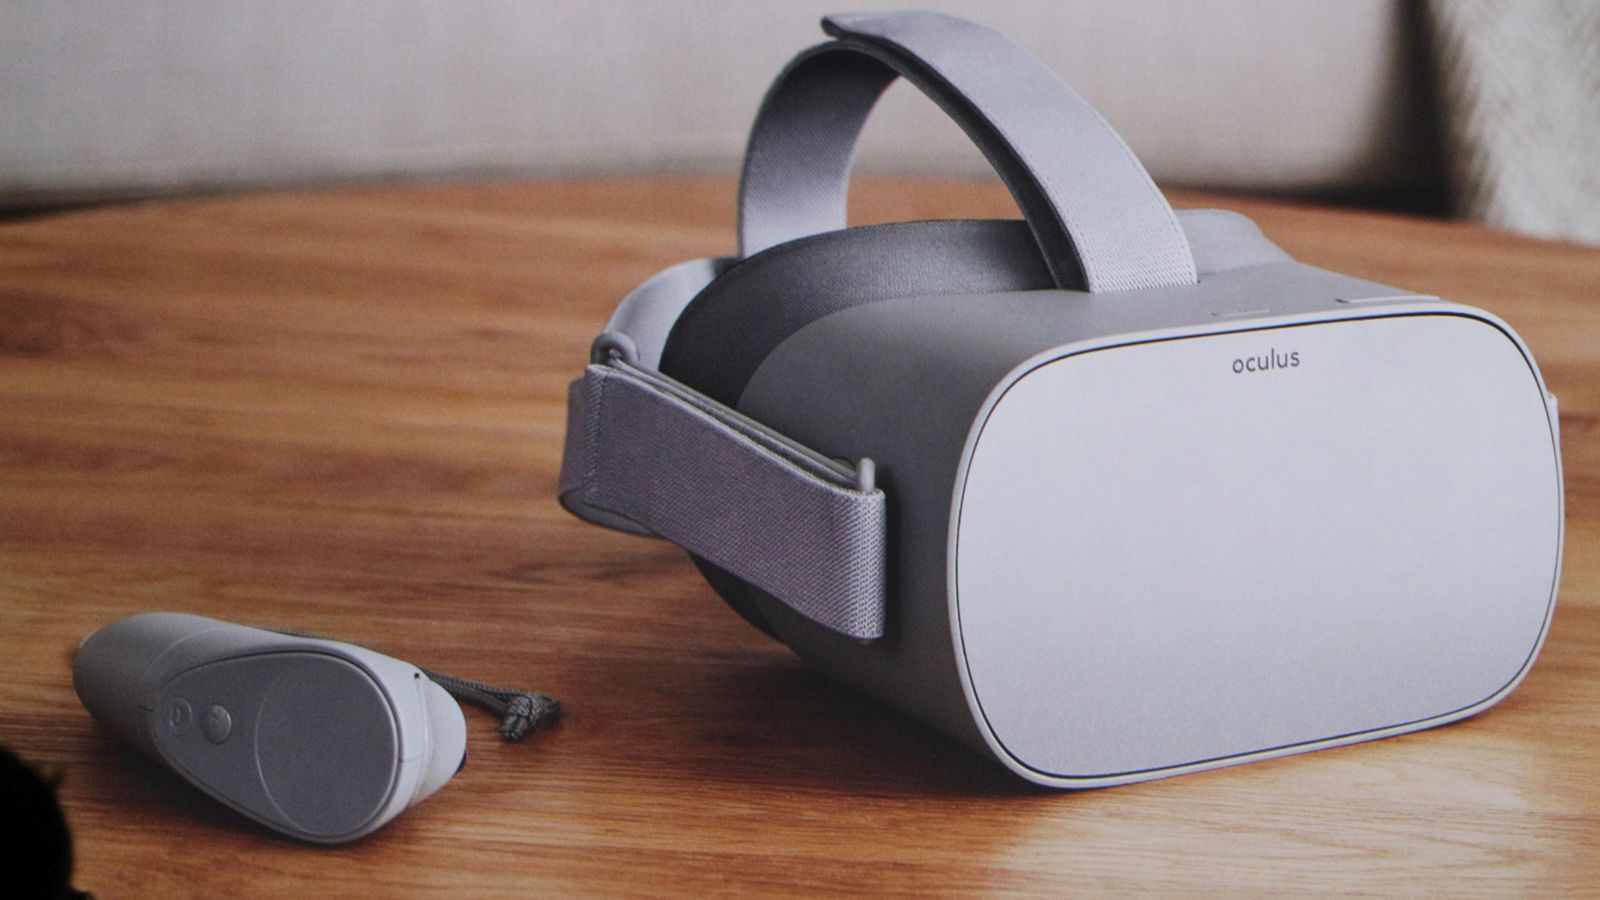 Facebook introduced a standalone VR headset Oculus Go